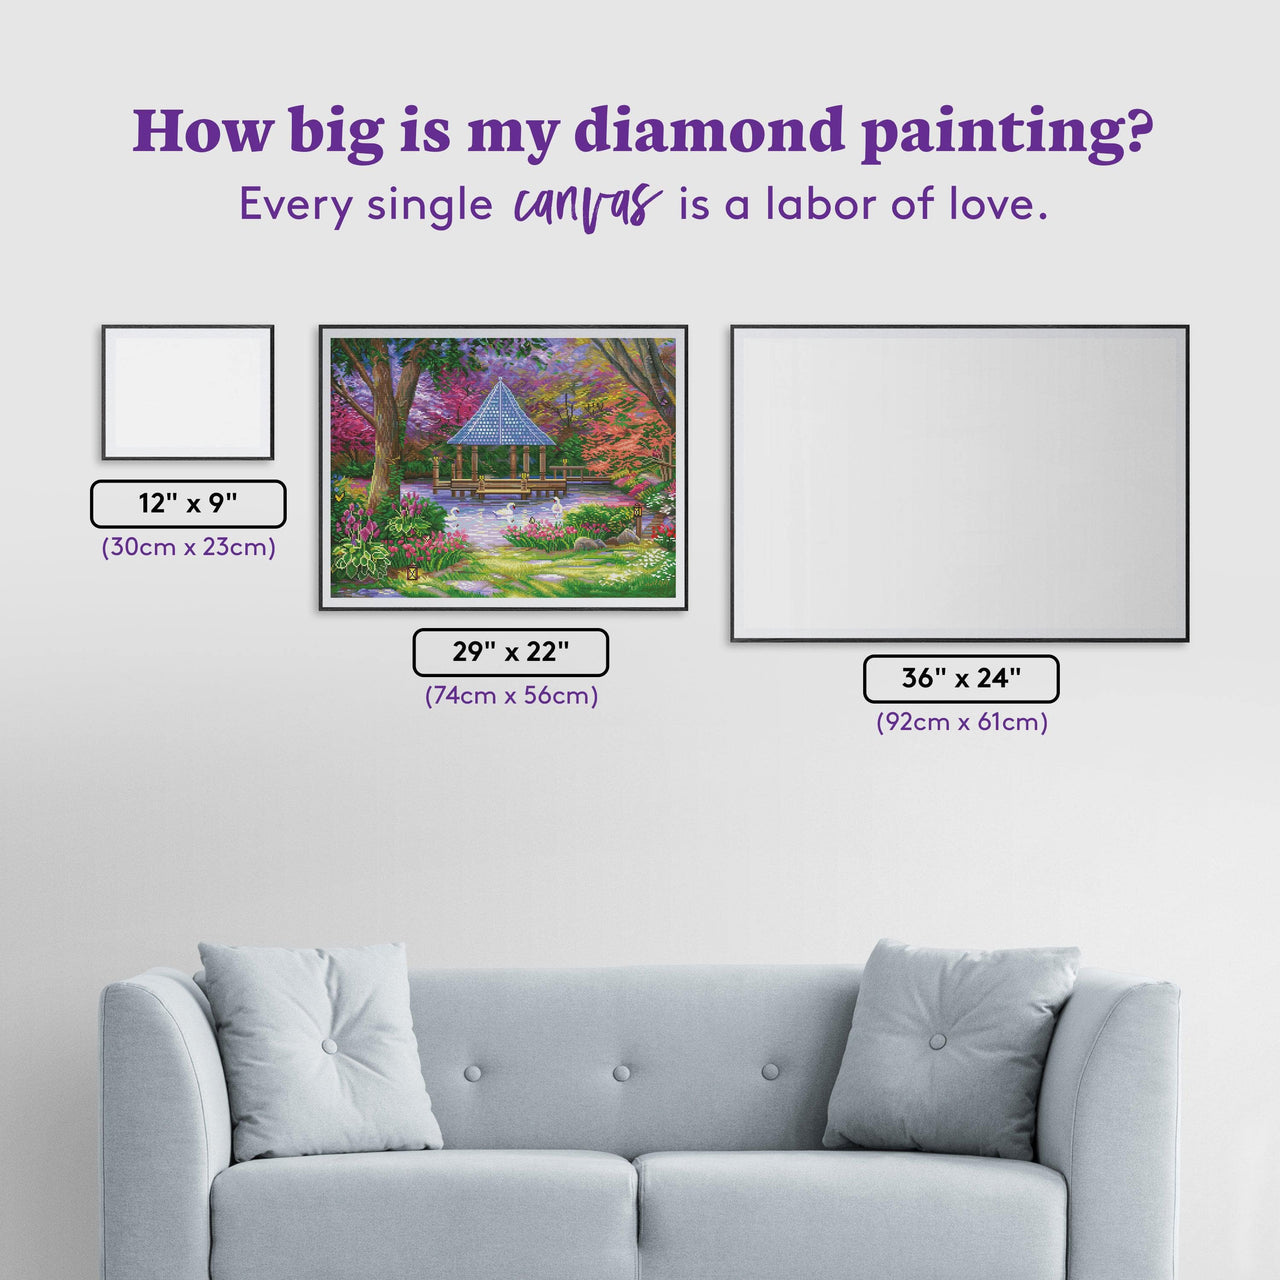 Diamond Painting Swan Pond 29" x 22" (74cm x 56cm) / Square With 65 Colors Including 4 ABs / 64,974